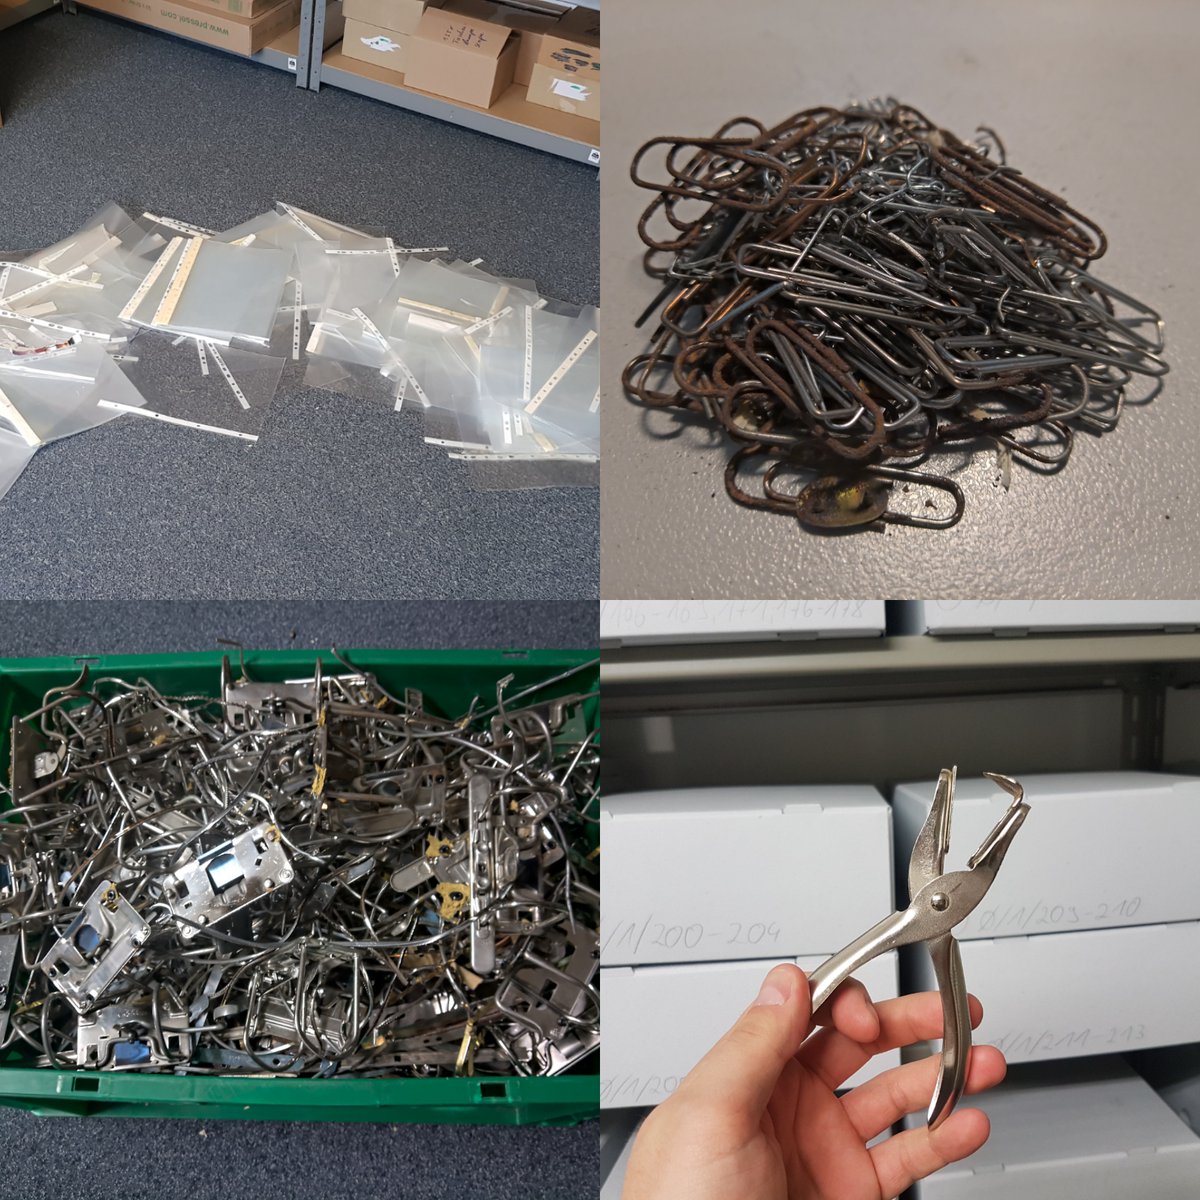 #Archive30 

Our #ArchiveAdvice today? Please use less metal and plastic in your files. We'll have to remove and discard it anyway. Better protect the files from the start! 

#ExploreYourArchive #rusty #metal #plastic #conservation